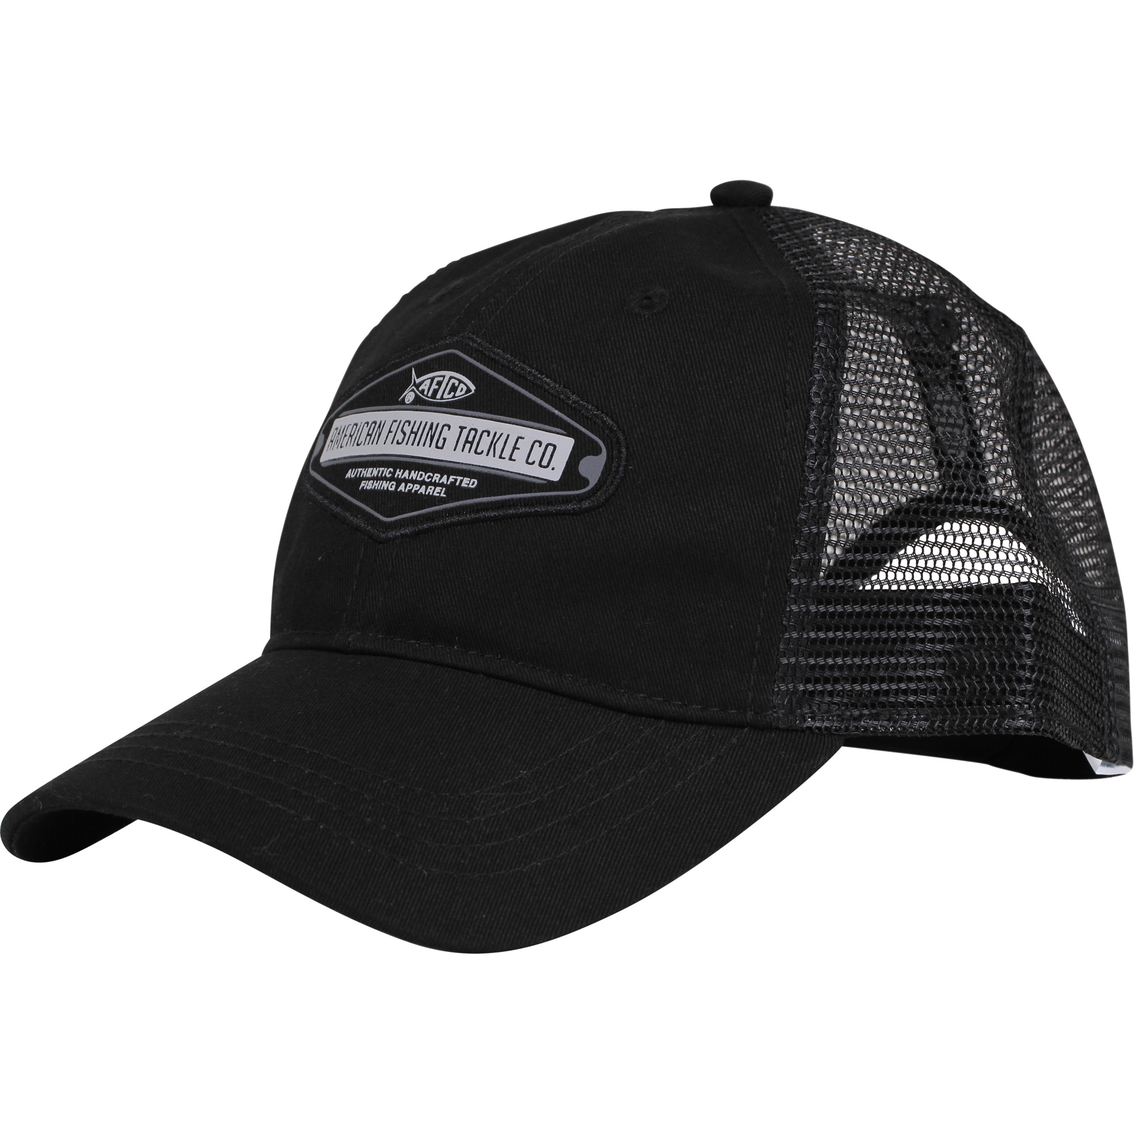 Aftco Badger Trucker Hat, Hats & Visors, Clothing & Accessories